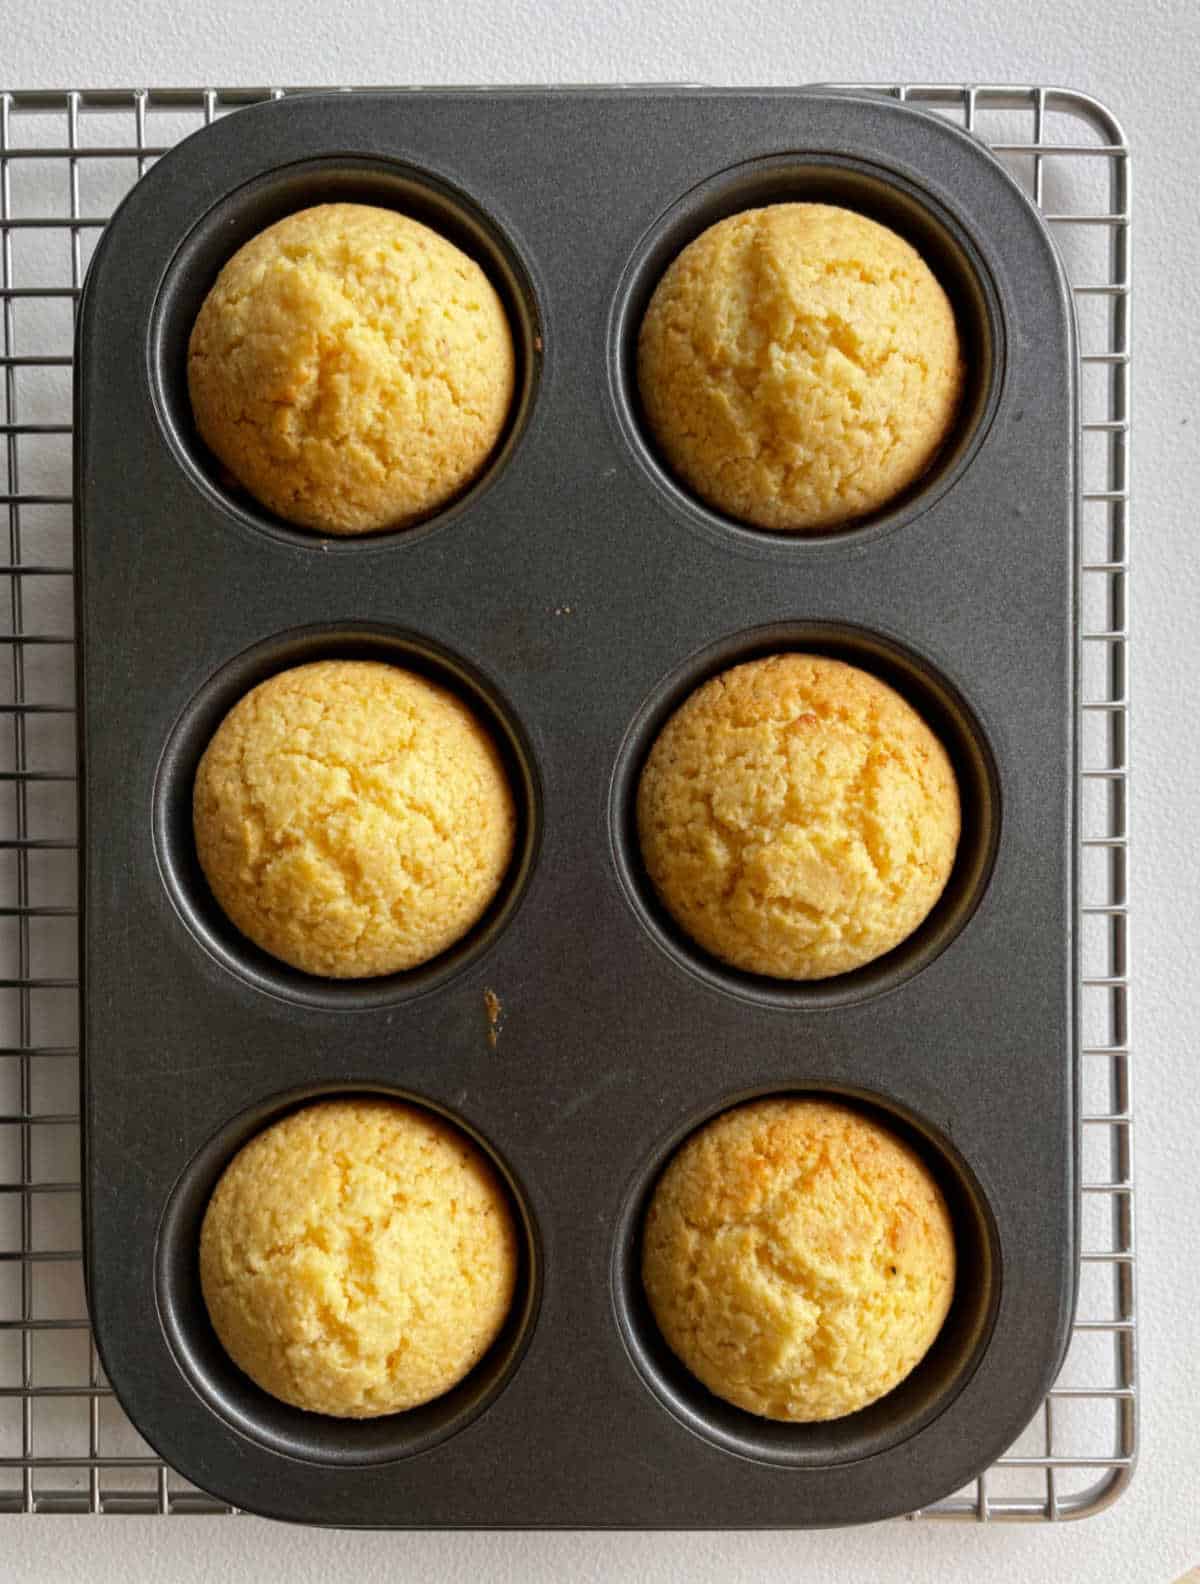 Top view of baked cornbread muffins in dark metal muffin tin